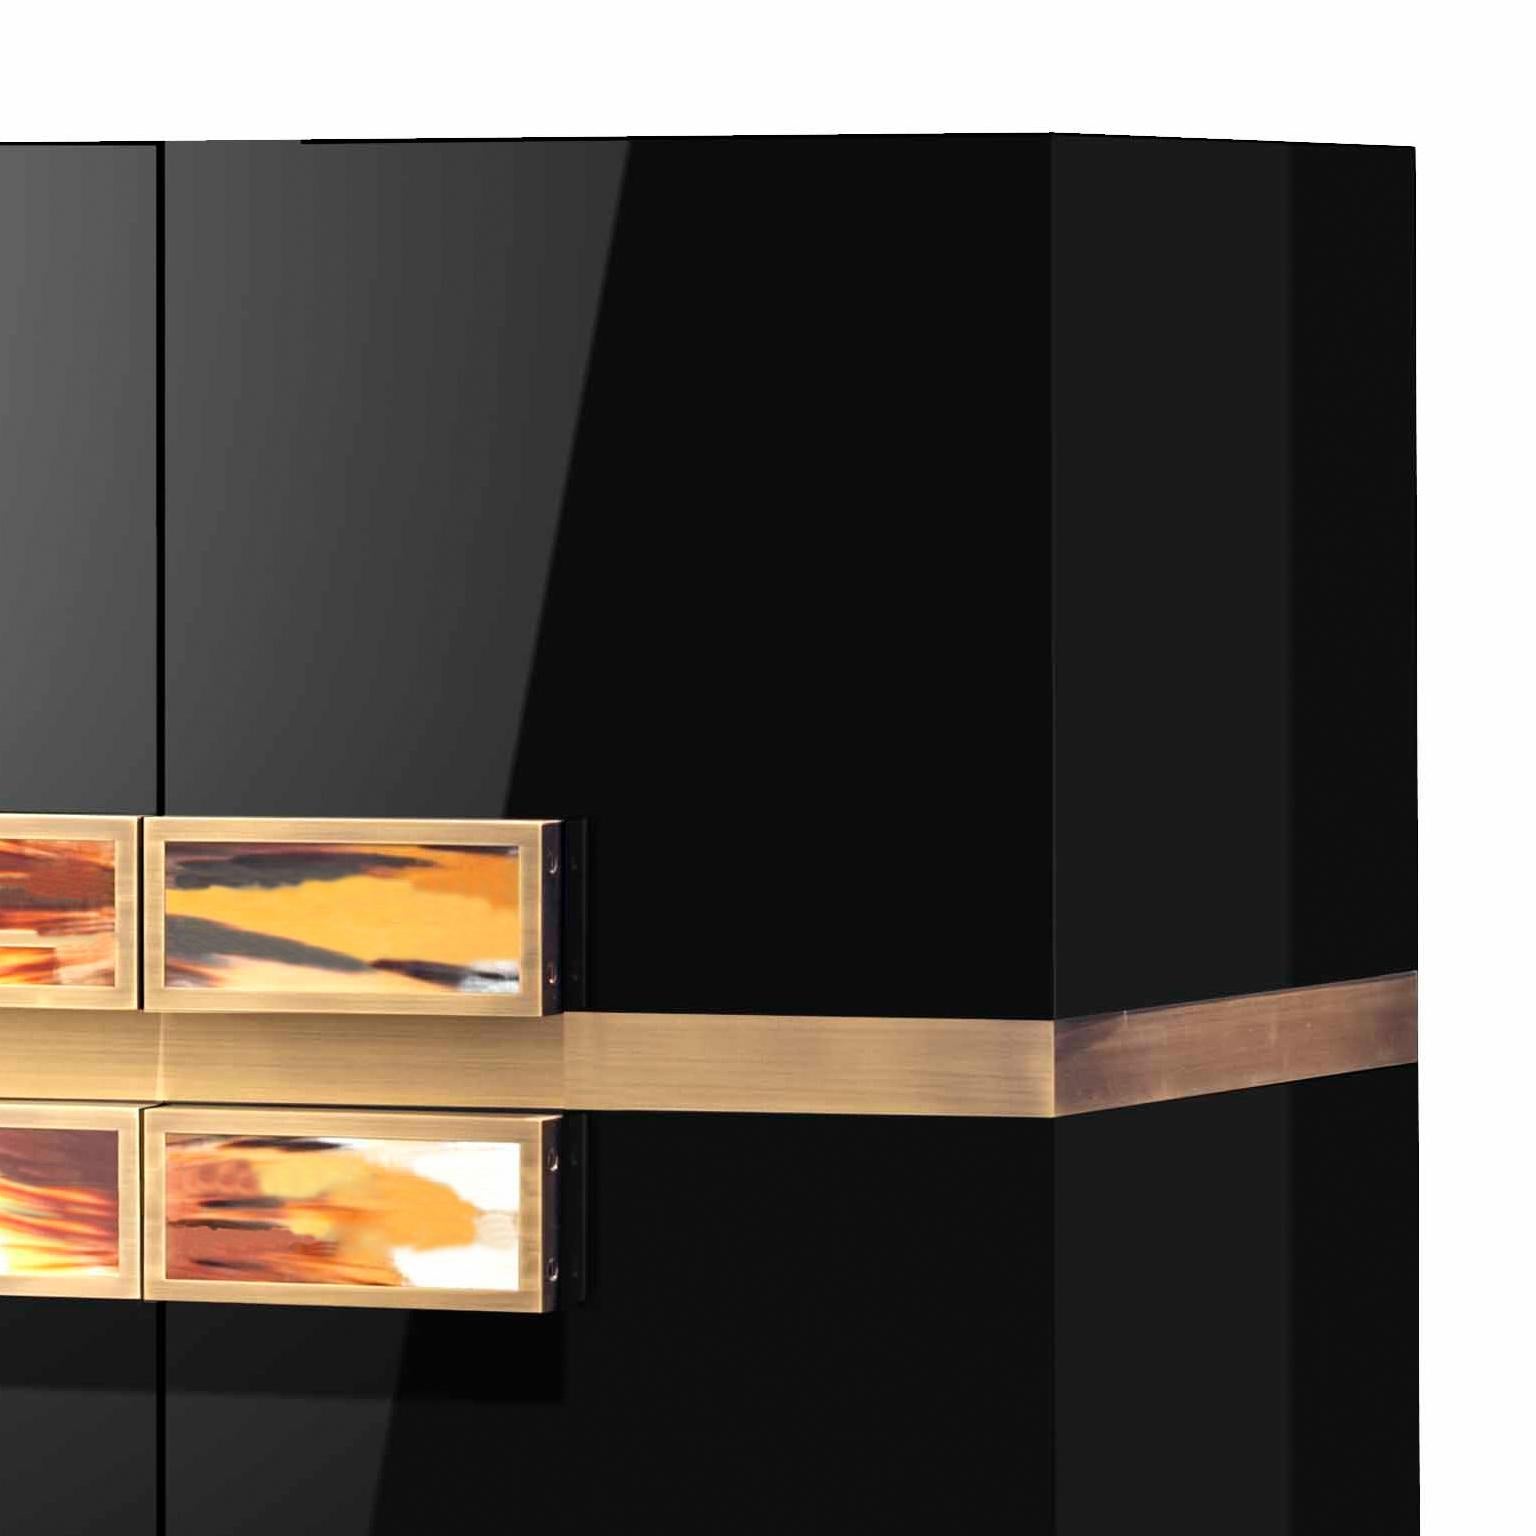 Offering an array of exquisite characteristics, our Cosmopolitan bar cabinet will add a touch of elegance to your entertaining space. Boasting four doors in glossy black lacquered wood, the design is enhanced by elegant handles in polished horn and